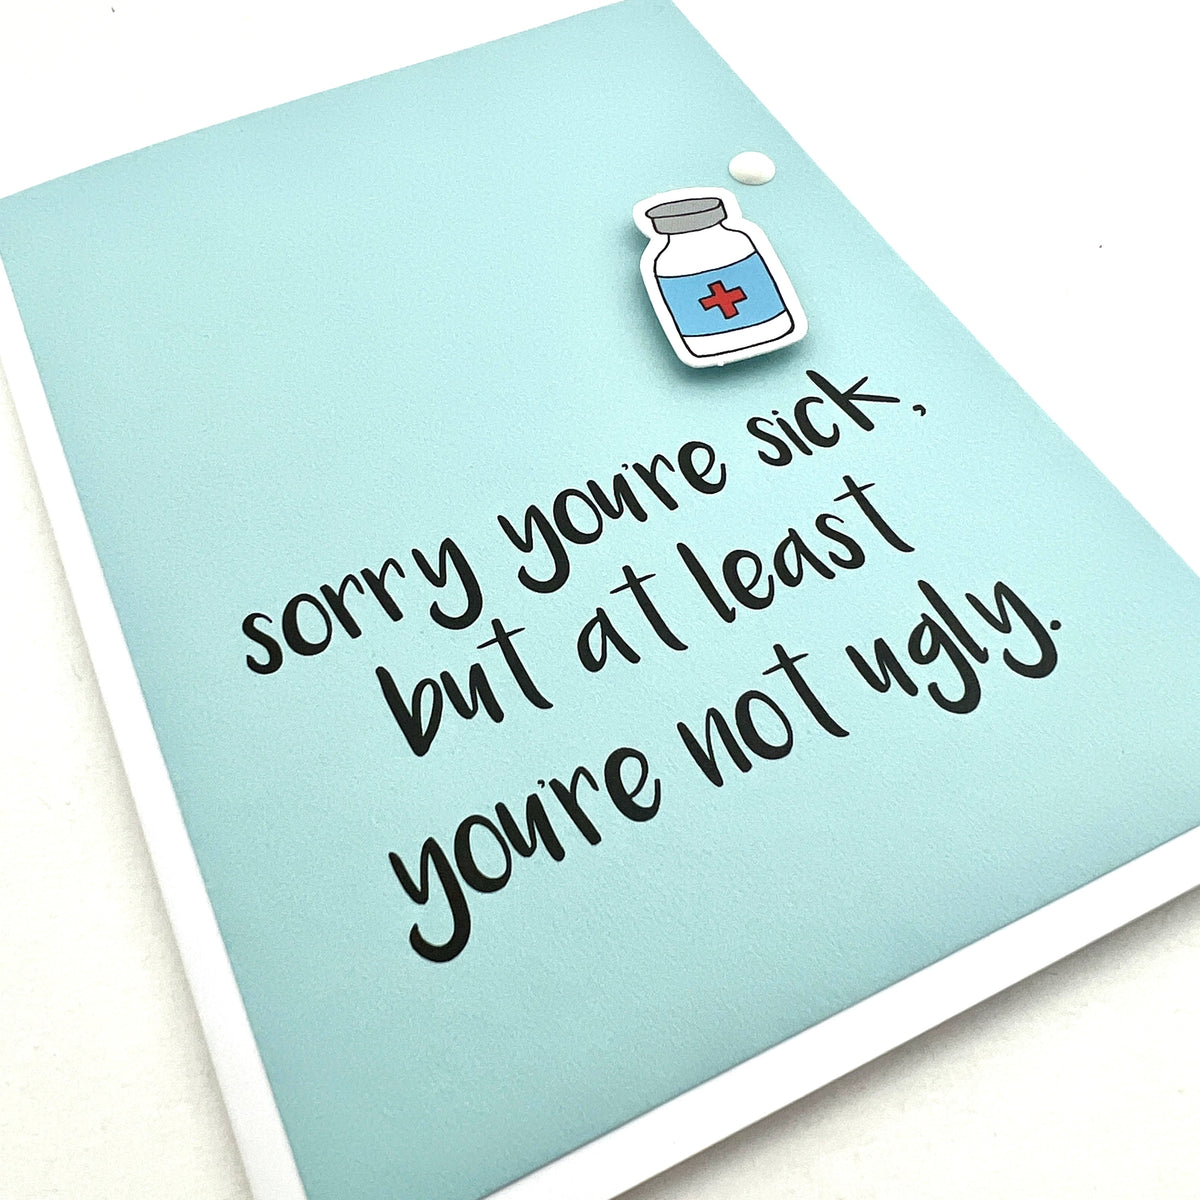 Get Well Sorry You're Sick Not Ugly card